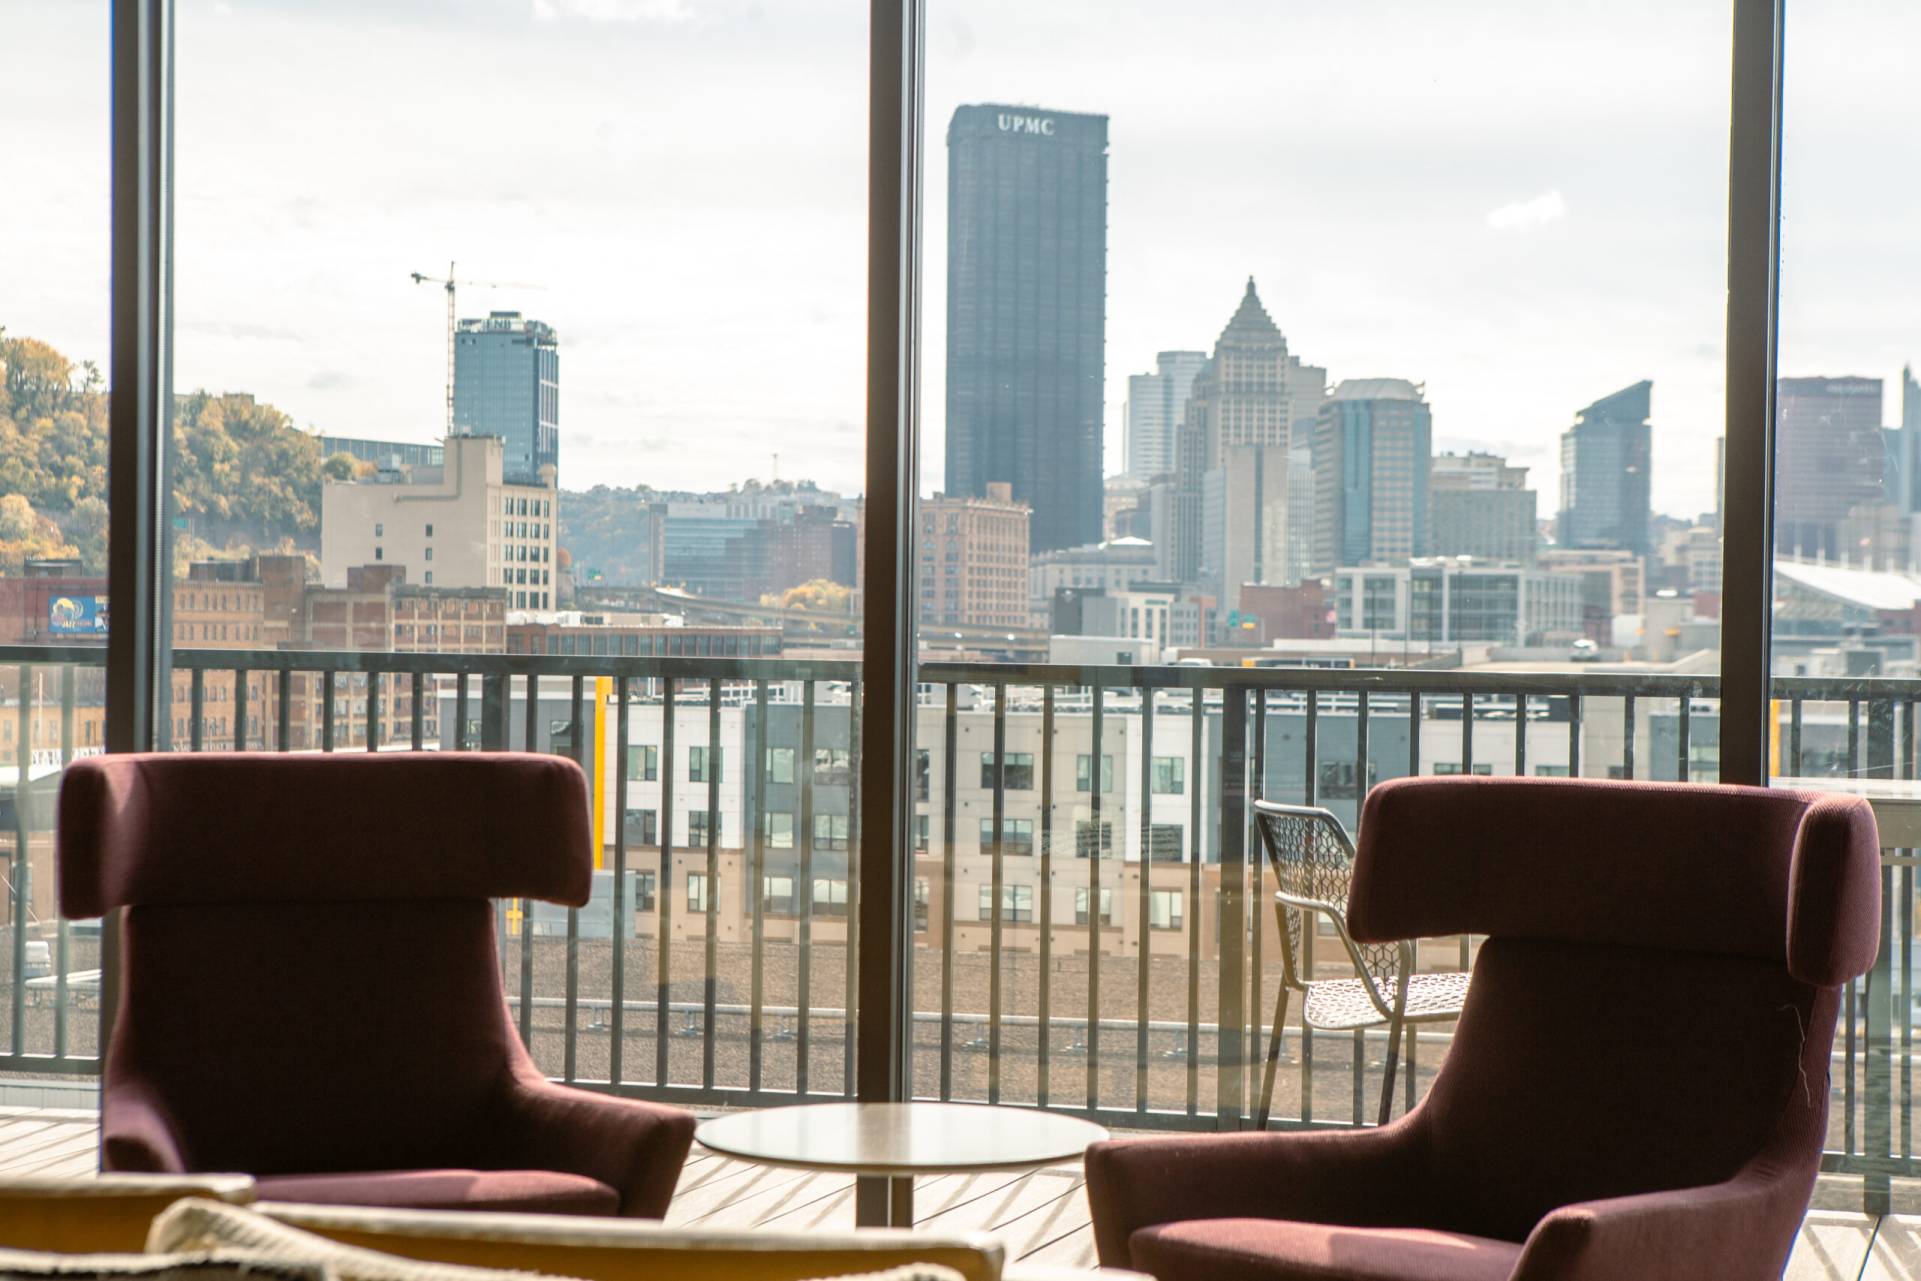 Expansive views of pittsburgh's skyline from the top floor club room.